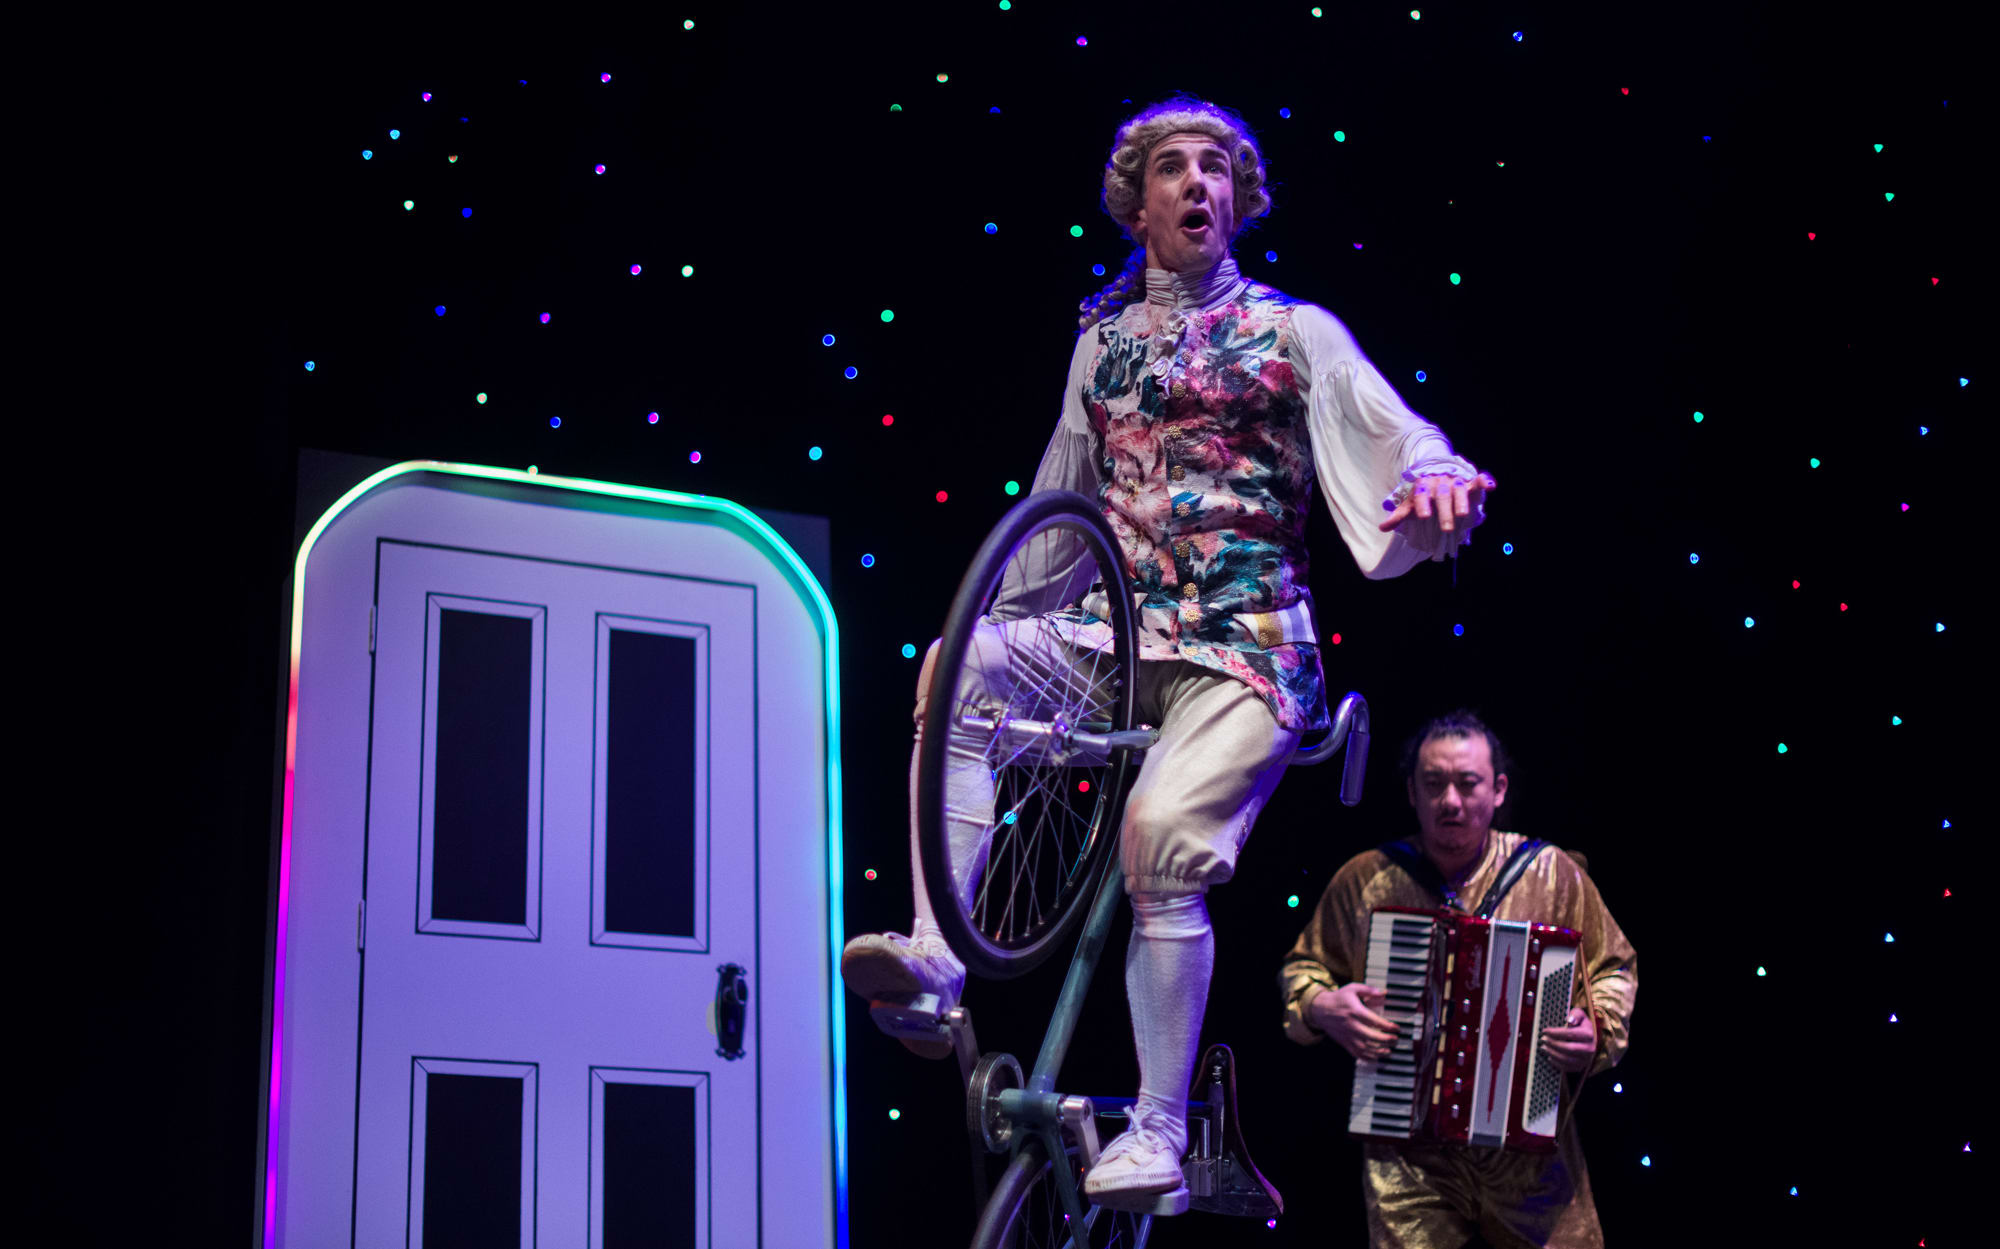 Wolfgang's Magical Musical Circus comes to the Auckland Arts Festival in March